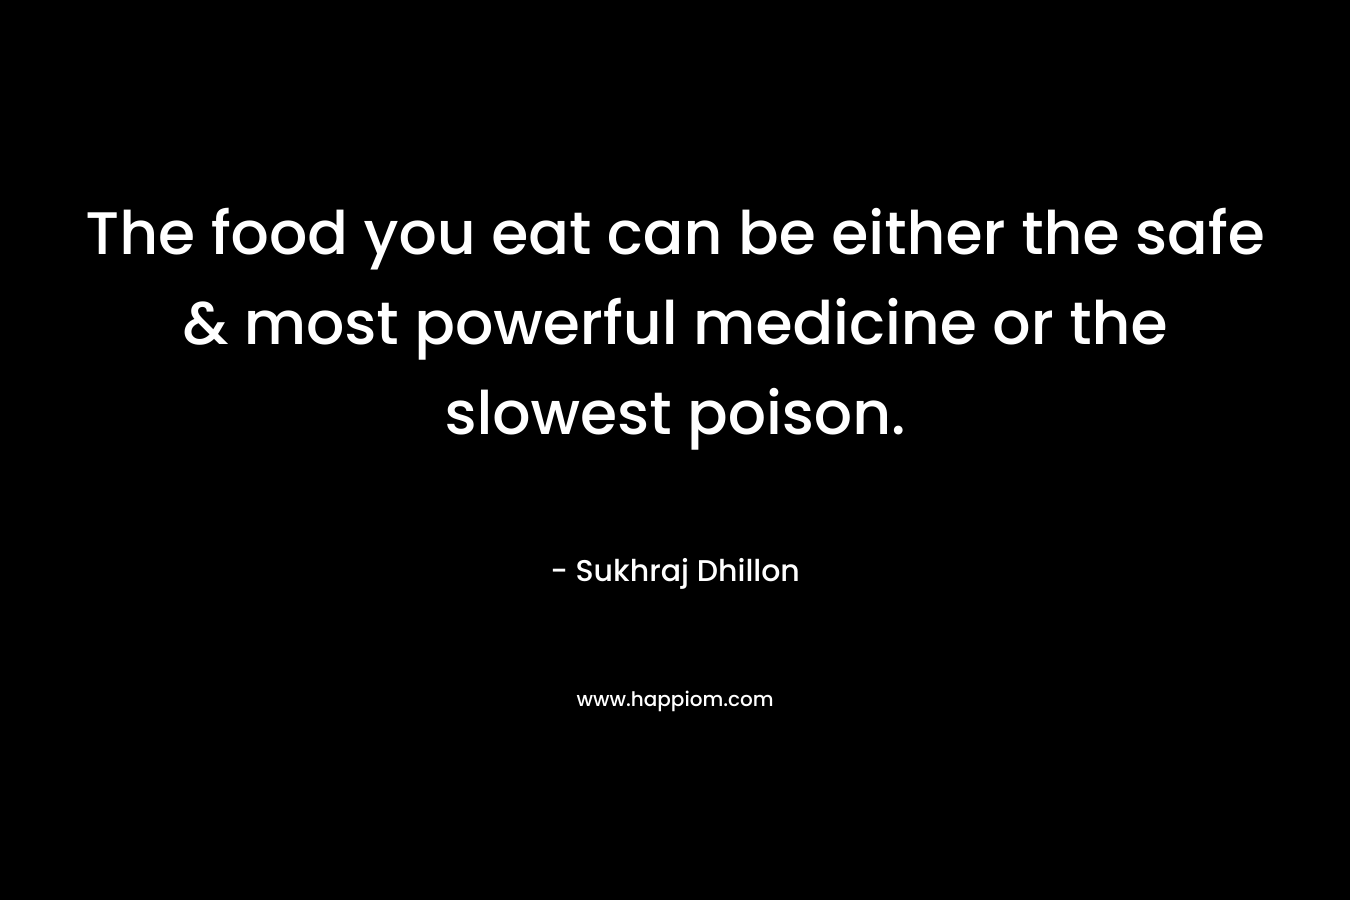 The food you eat can be either the safe & most powerful medicine or the slowest poison. – Sukhraj Dhillon